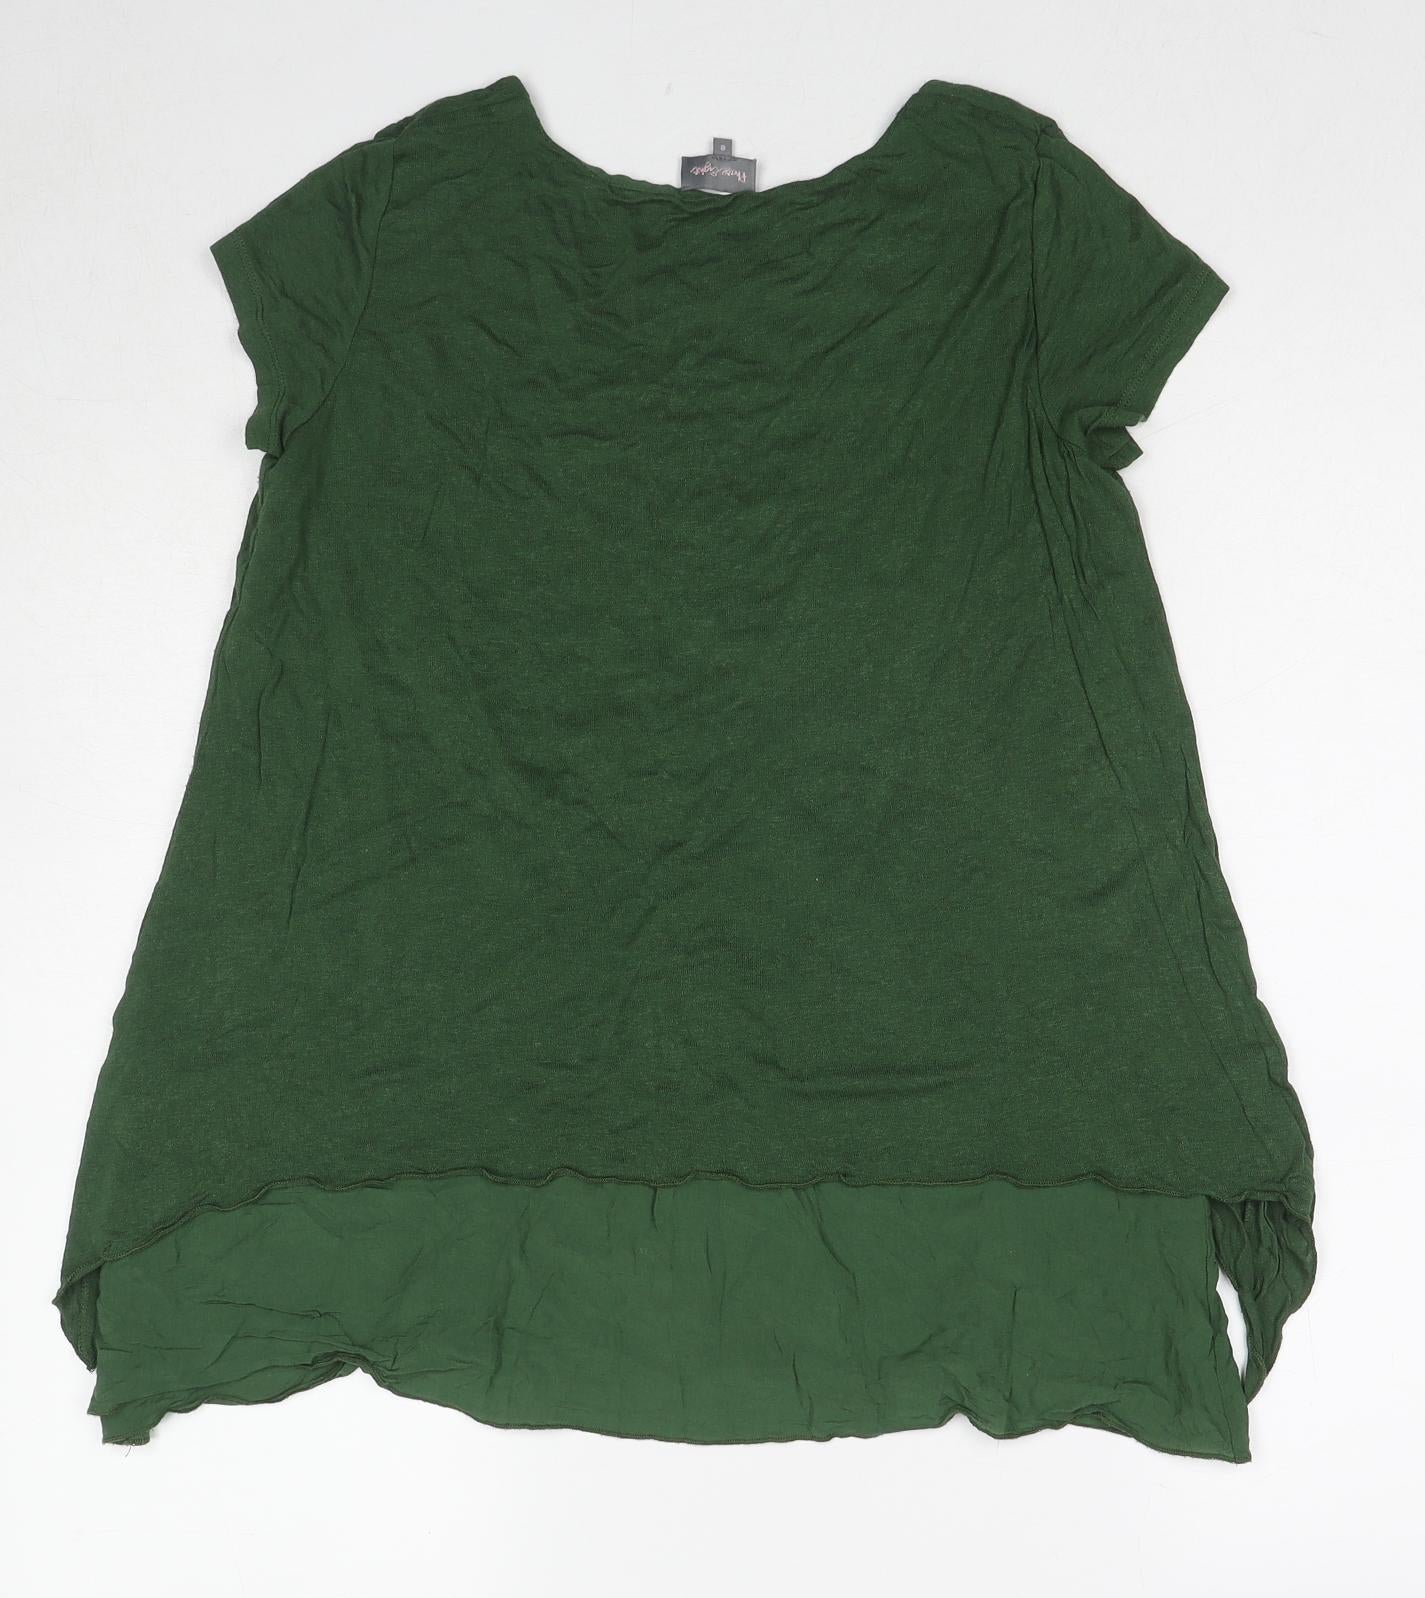 Phase Eight Womens Green Polyester Basic T-Shirt Size 8 Boat Neck - Layered